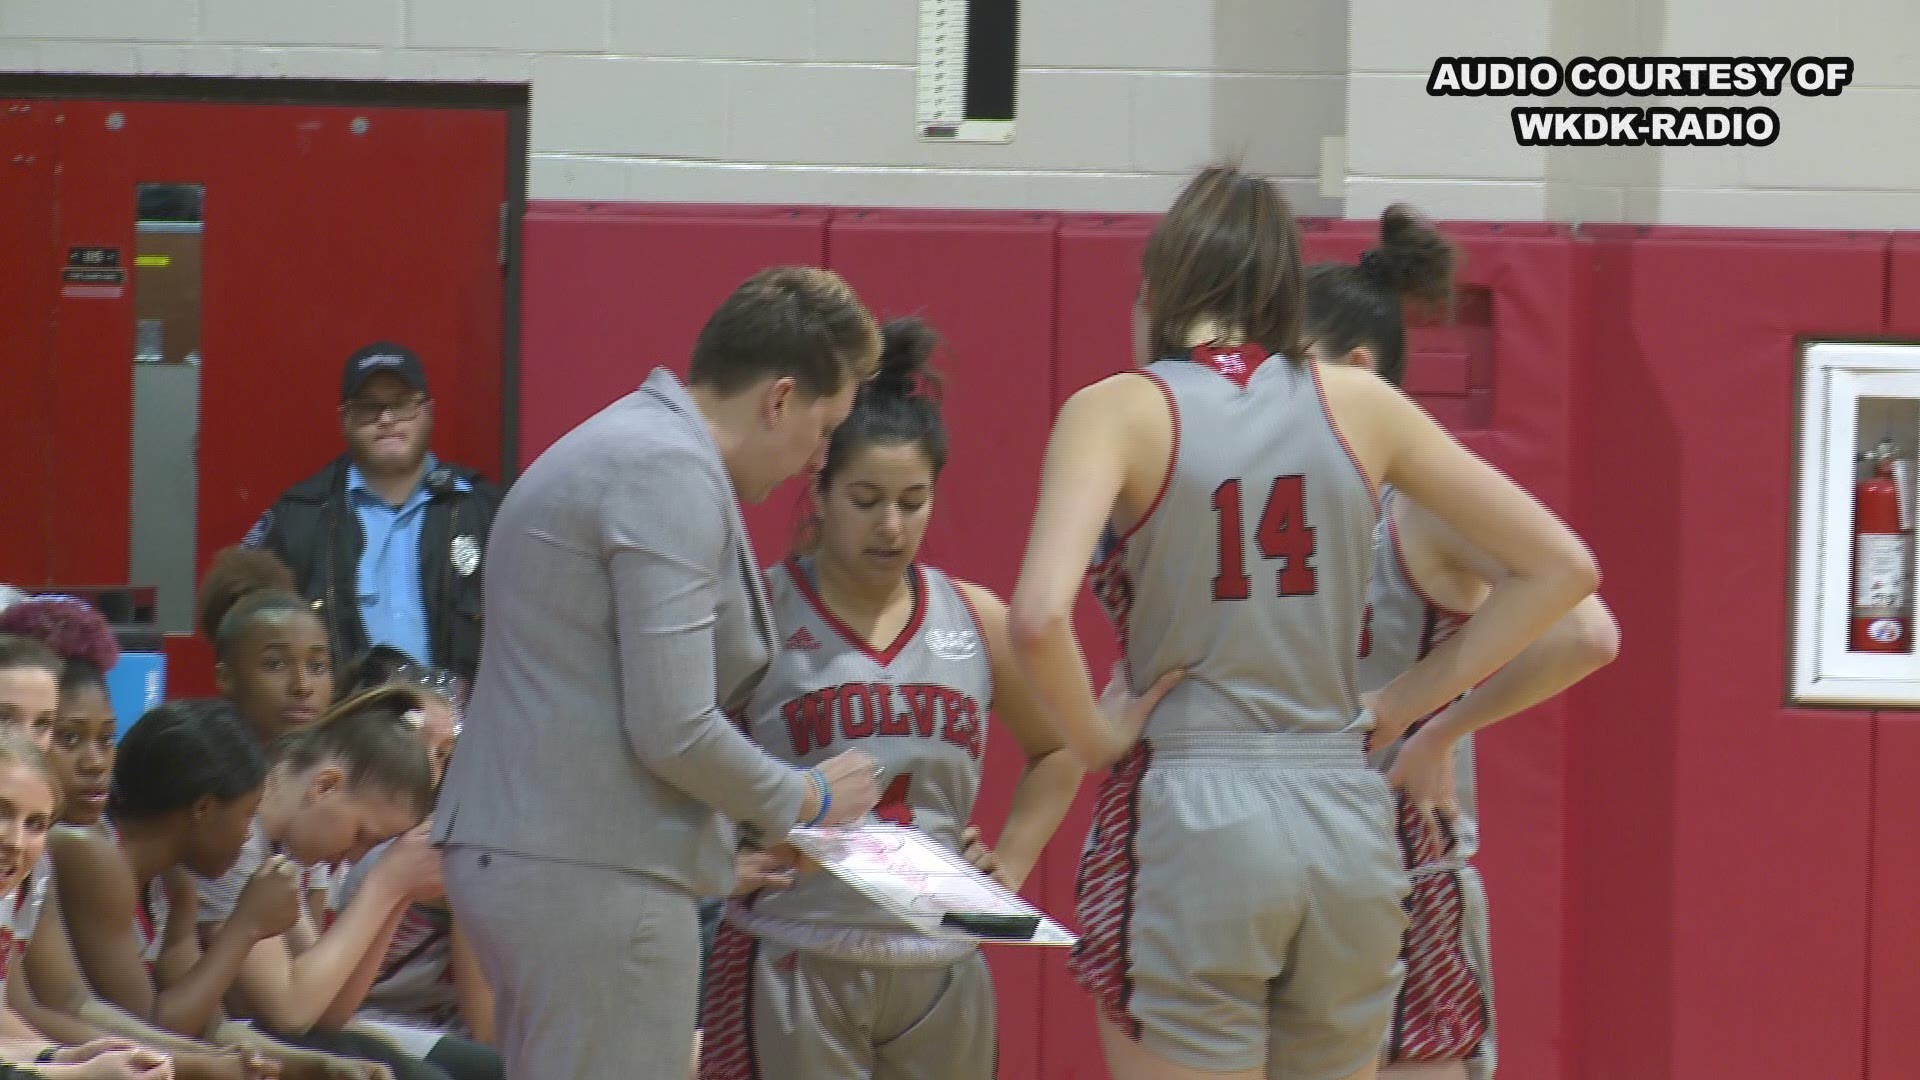 The Newberry College women's basketball team stayed unbeaten with Tuesday's 69-68 win over Benedict. Here is the video from News19 and the radio call from WKDK AM1240 in Newberry.